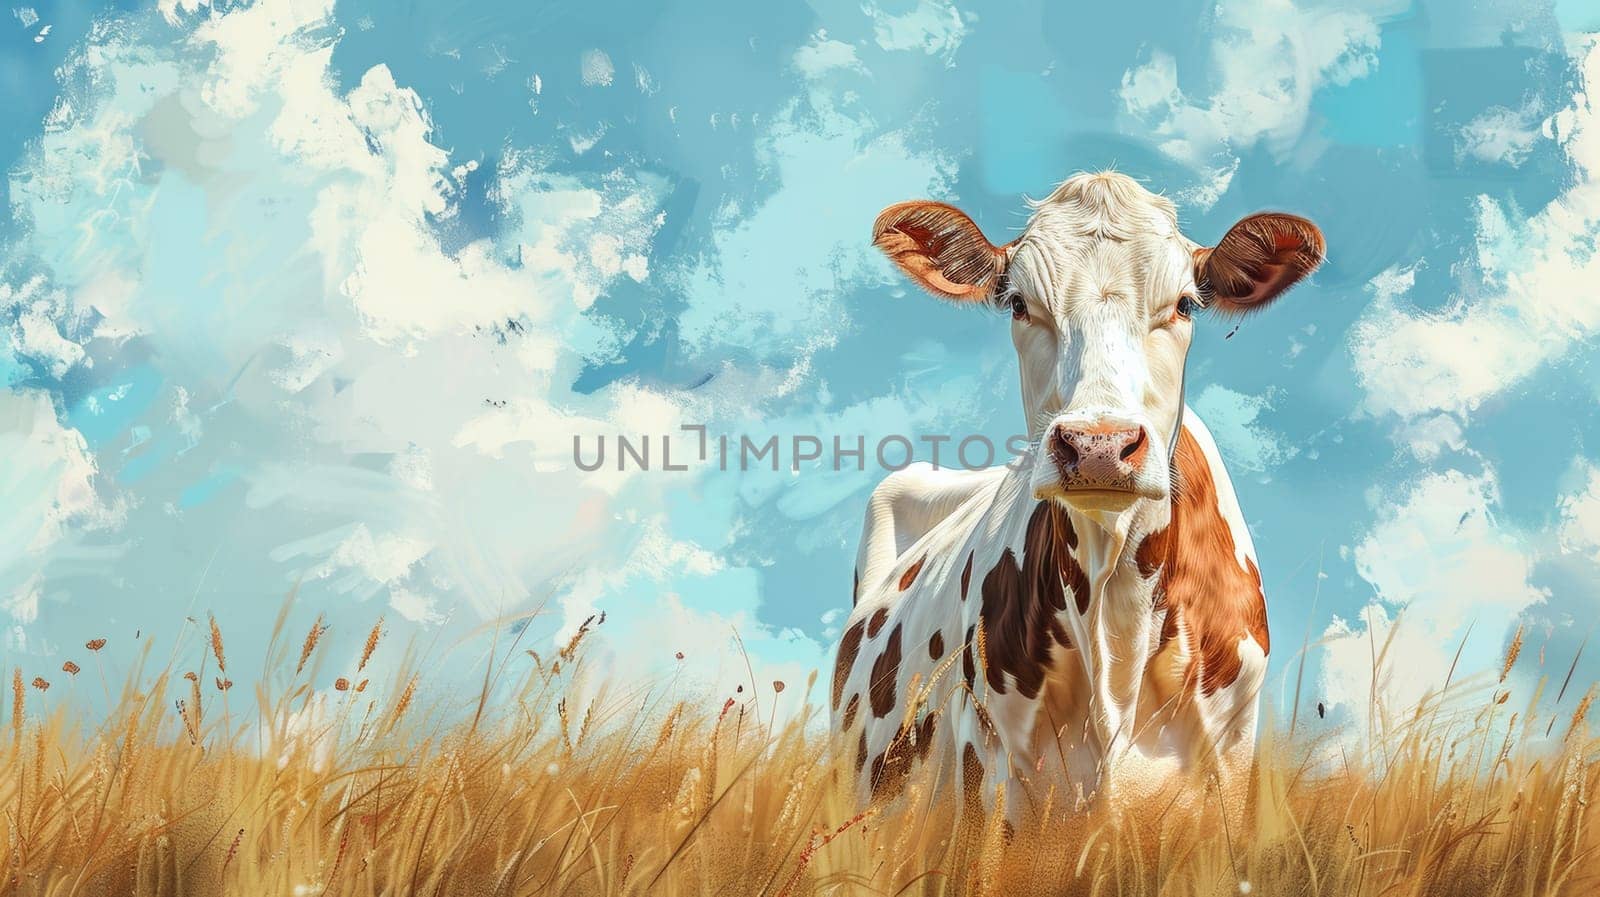 A brown and white cow standing in a field of tall grass